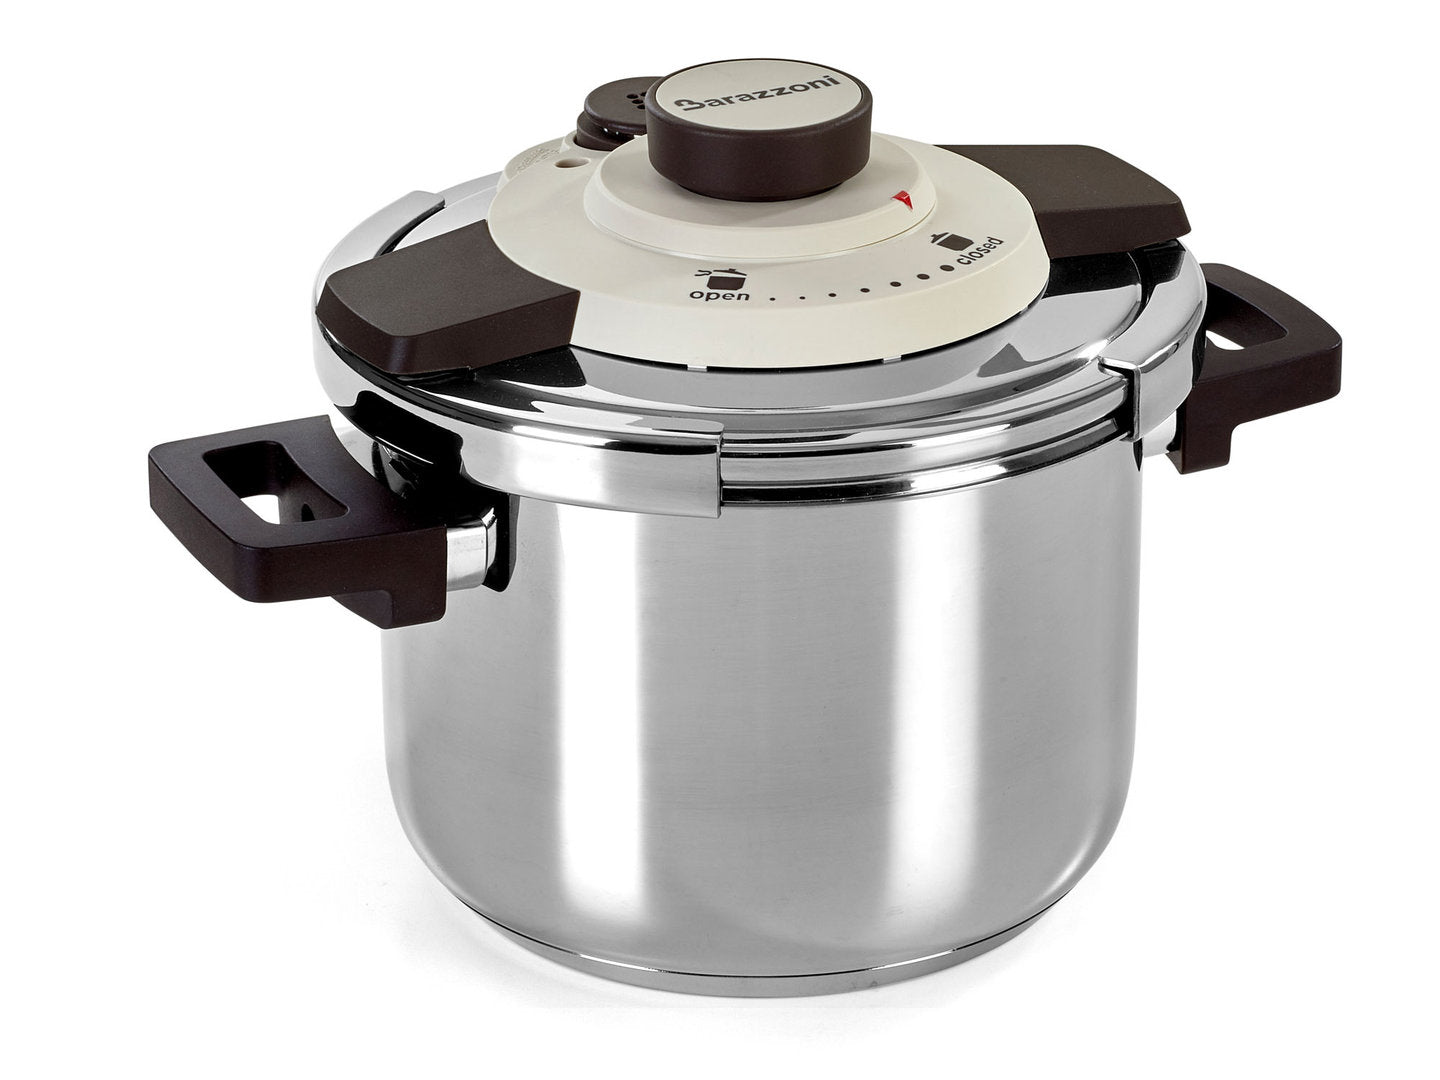 Seb 6 L Pressure Cooker, Induction, Stainless Steel Pressure